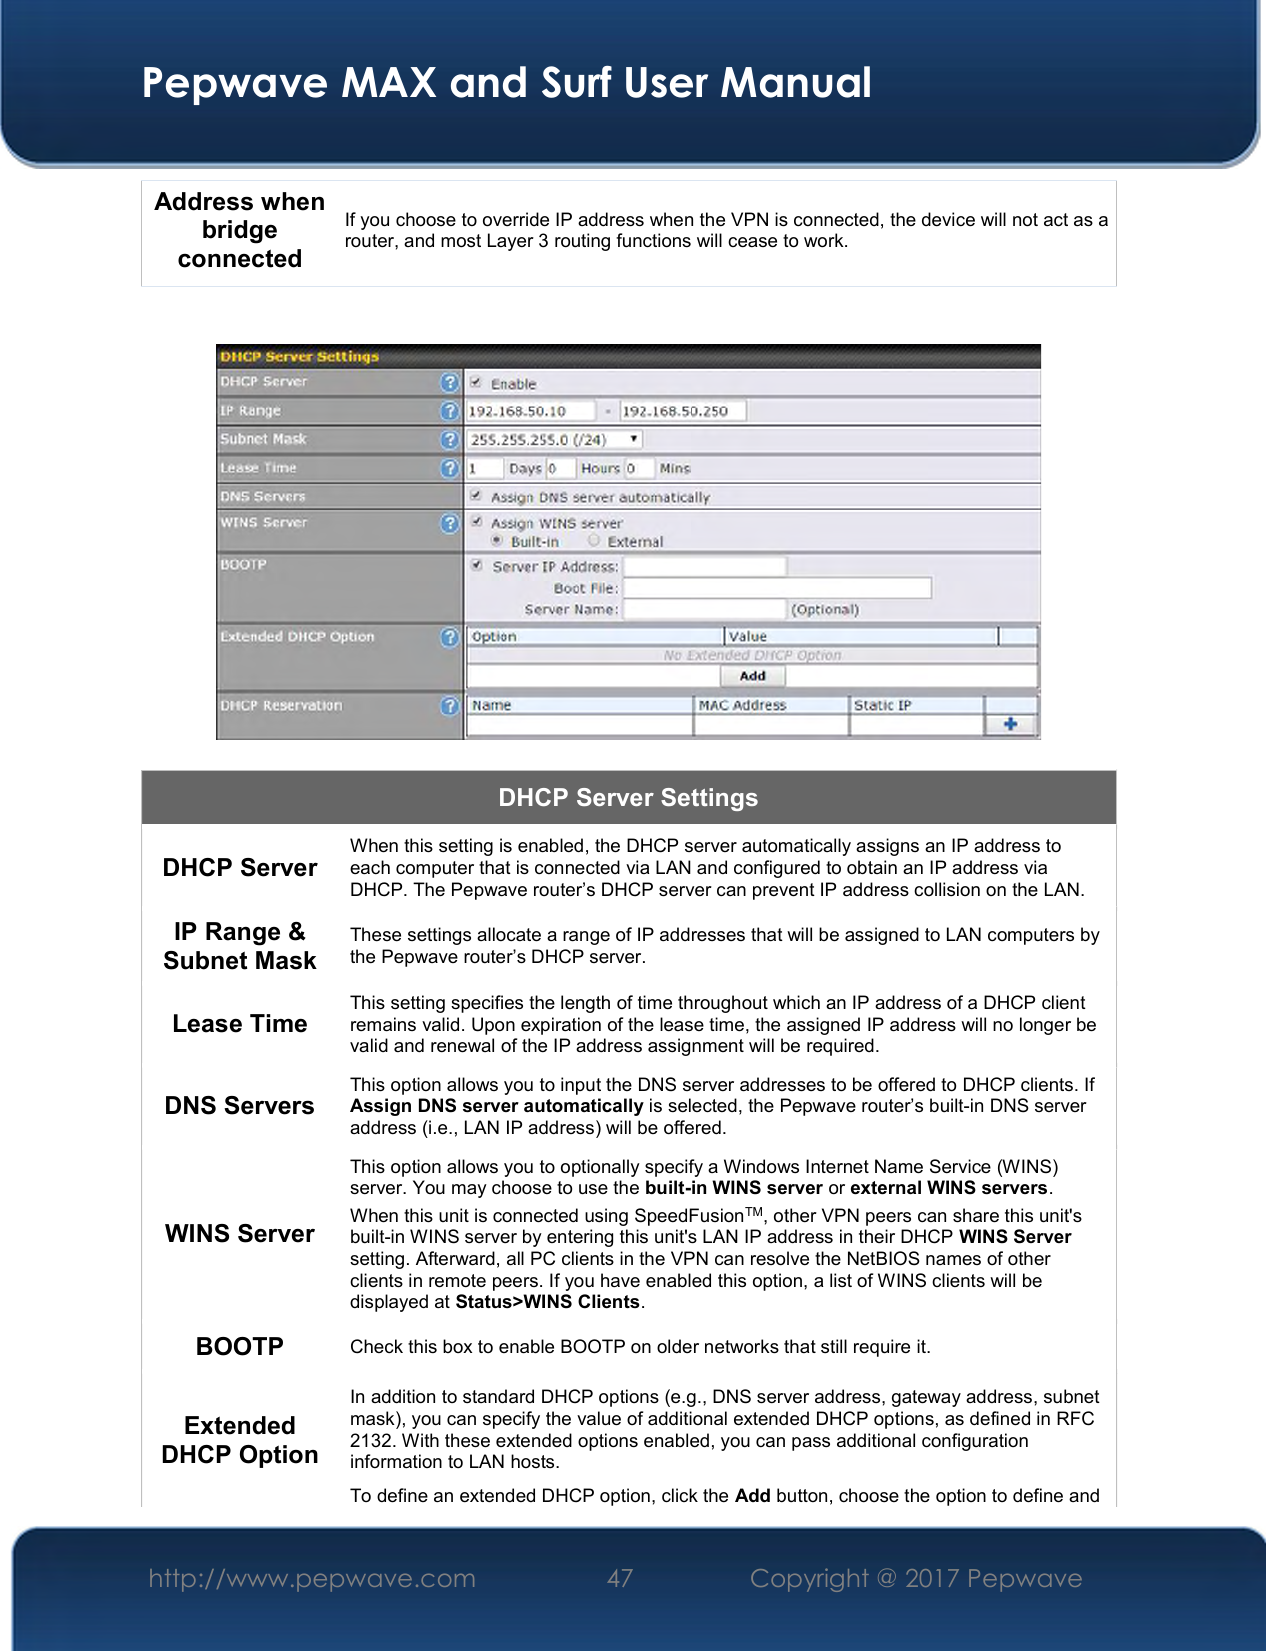  Pepwave MAX and Surf User Manual http://www.pepwave.com  47    Copyright @ 2017 Pepwave   Address when bridge connected  If you choose to override IP address when the VPN is connected, the device will not act as a router, and most Layer 3 routing functions will cease to work.     DHCP Server Settings DHCP Server  When this setting is enabled, the DHCP server automatically assigns an IP address to each computer that is connected via LAN and configured to obtain an IP address via DHCP. The Pepwave router’s DHCP server can prevent IP address collision on the LAN. IP Range &amp; Subnet Mask These settings allocate a range of IP addresses that will be assigned to LAN computers by the Pepwave router’s DHCP server. Lease Time  This setting specifies the length of time throughout which an IP address of a DHCP client remains valid. Upon expiration of the lease time, the assigned IP address will no longer be valid and renewal of the IP address assignment will be required. DNS Servers  This option allows you to input the DNS server addresses to be offered to DHCP clients. If Assign DNS server automatically is selected, the Pepwave router’s built-in DNS server address (i.e., LAN IP address) will be offered. WINS Server This option allows you to optionally specify a Windows Internet Name Service (WINS) server. You may choose to use the built-in WINS server or external WINS servers. When this unit is connected using SpeedFusionTM, other VPN peers can share this unit&apos;s built-in WINS server by entering this unit&apos;s LAN IP address in their DHCP WINS Server setting. Afterward, all PC clients in the VPN can resolve the NetBIOS names of other clients in remote peers. If you have enabled this option, a list of WINS clients will be displayed at Status&gt;WINS Clients. BOOTP  Check this box to enable BOOTP on older networks that still require it. Extended DHCP Option In addition to standard DHCP options (e.g., DNS server address, gateway address, subnet mask), you can specify the value of additional extended DHCP options, as defined in RFC 2132. With these extended options enabled, you can pass additional configuration information to LAN hosts. To define an extended DHCP option, click the Add button, choose the option to define and 